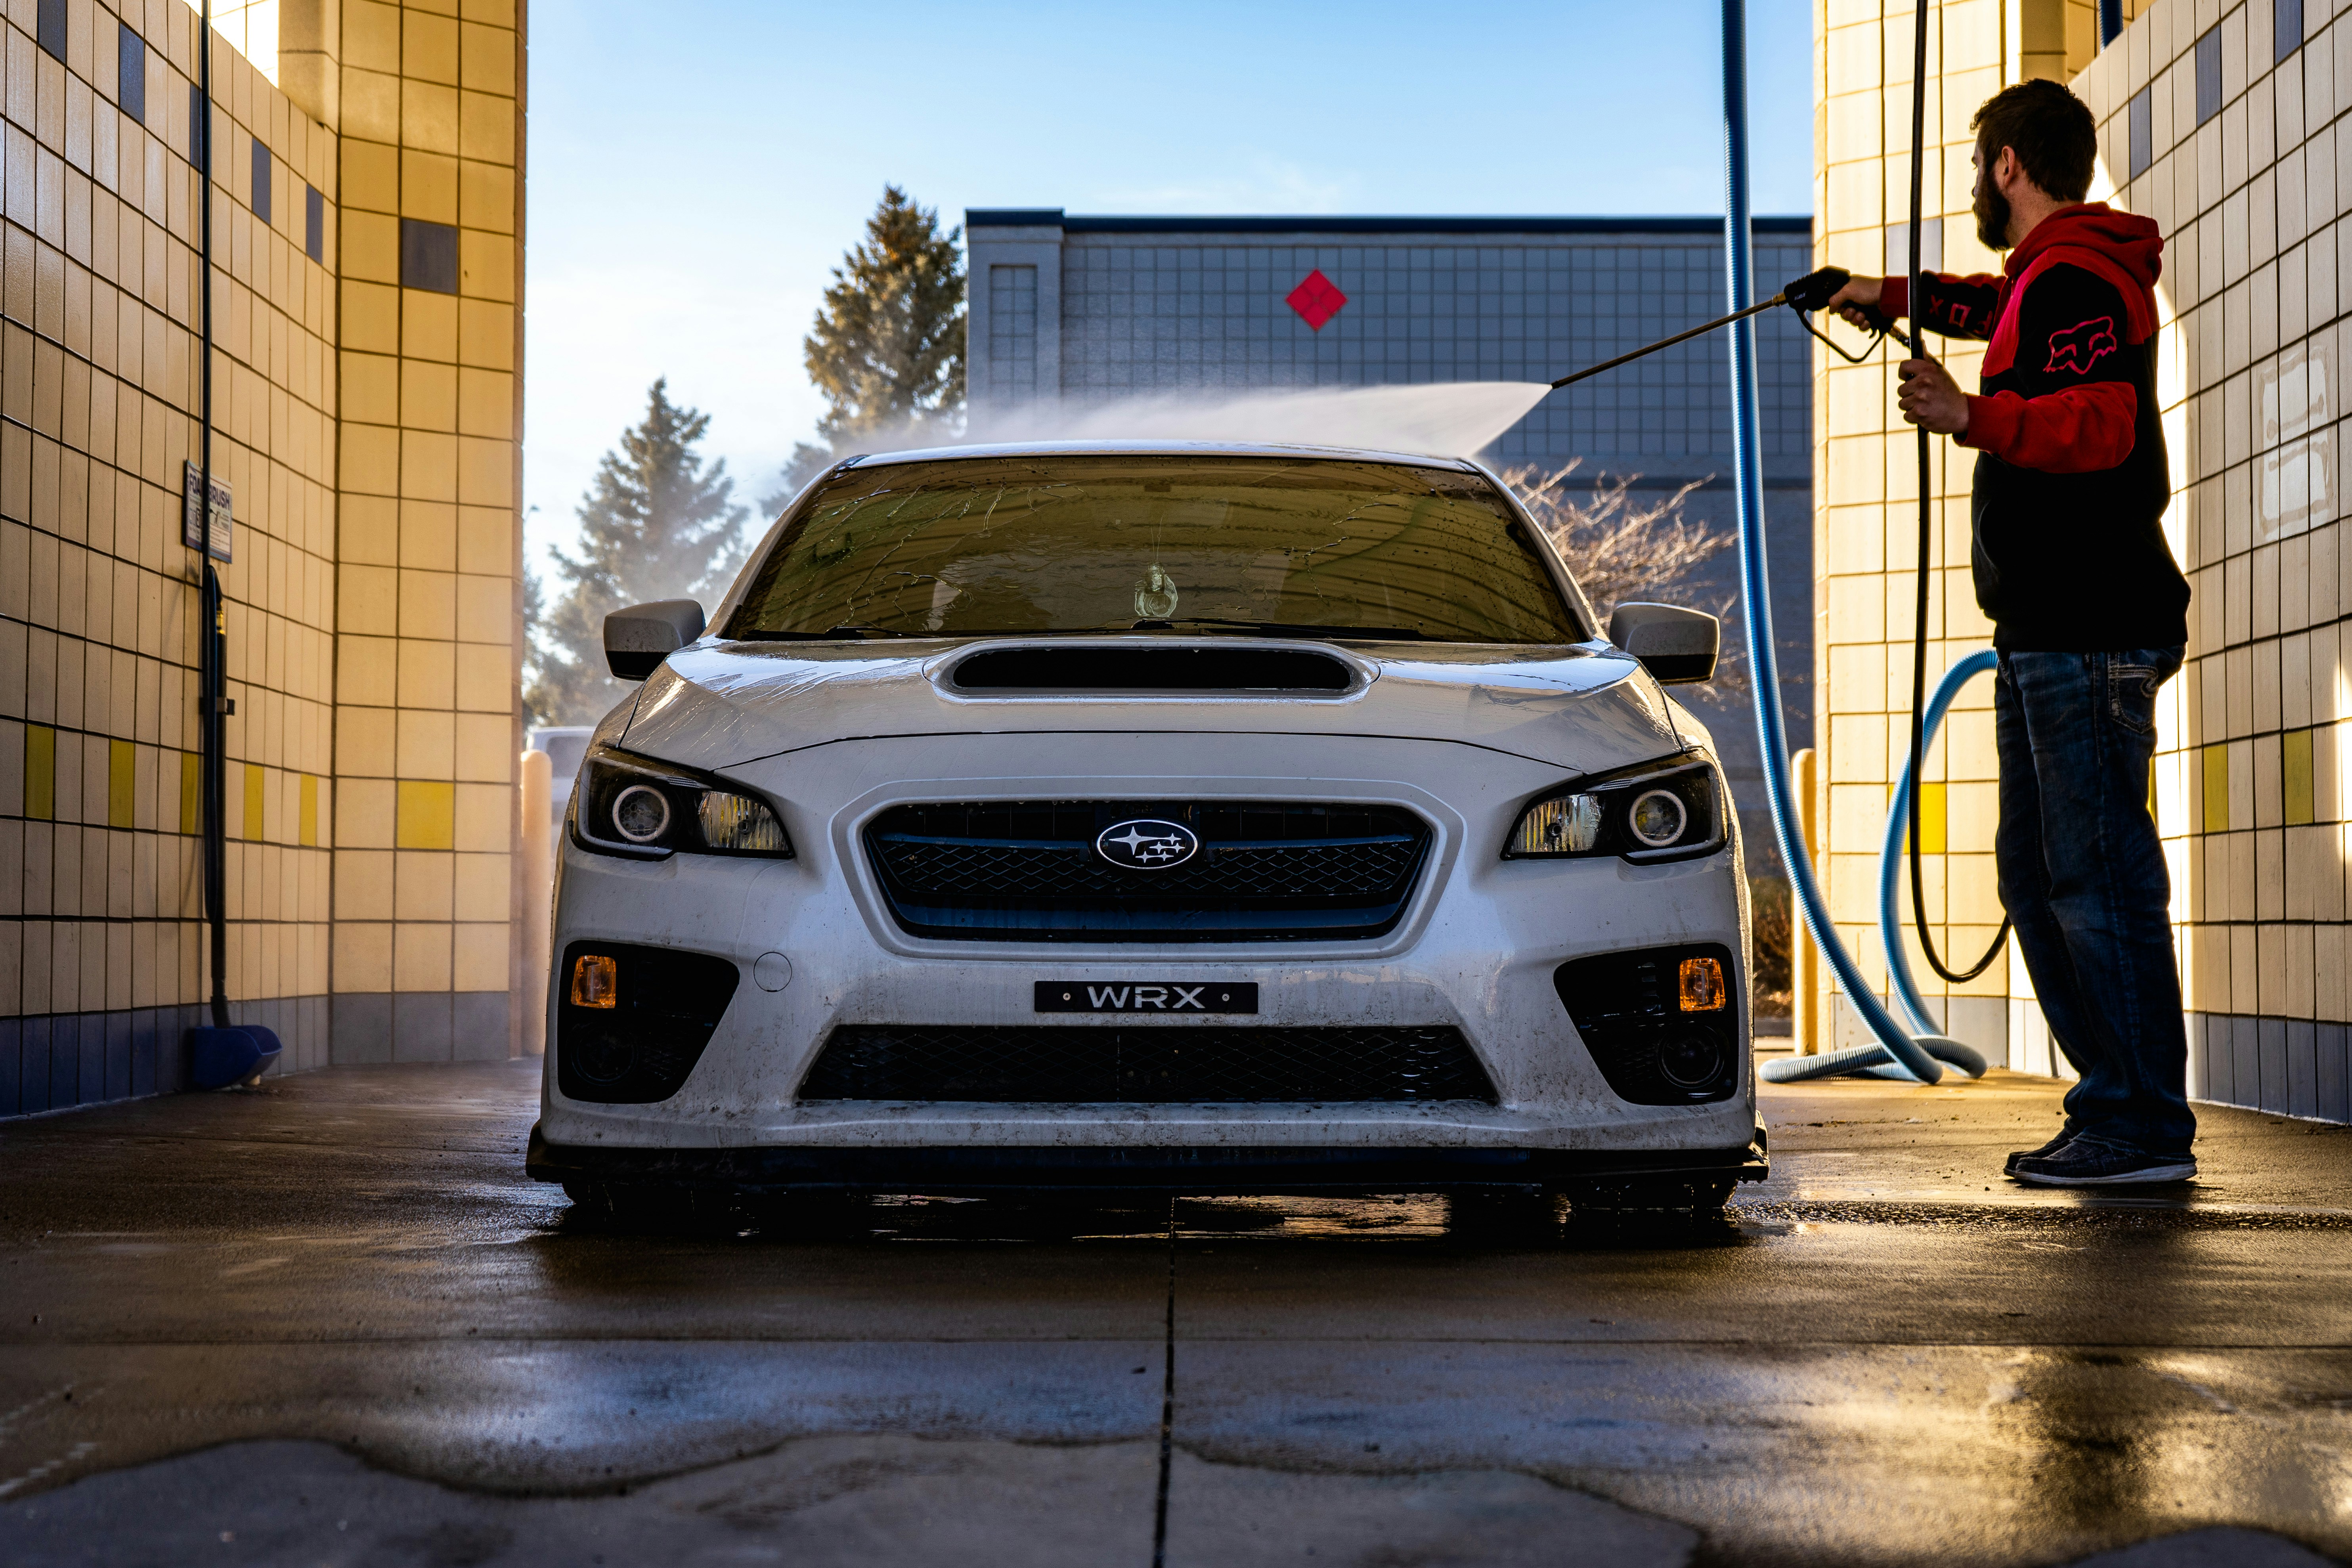 What Is The Fuel Capacity Of A Subaru Legacy?